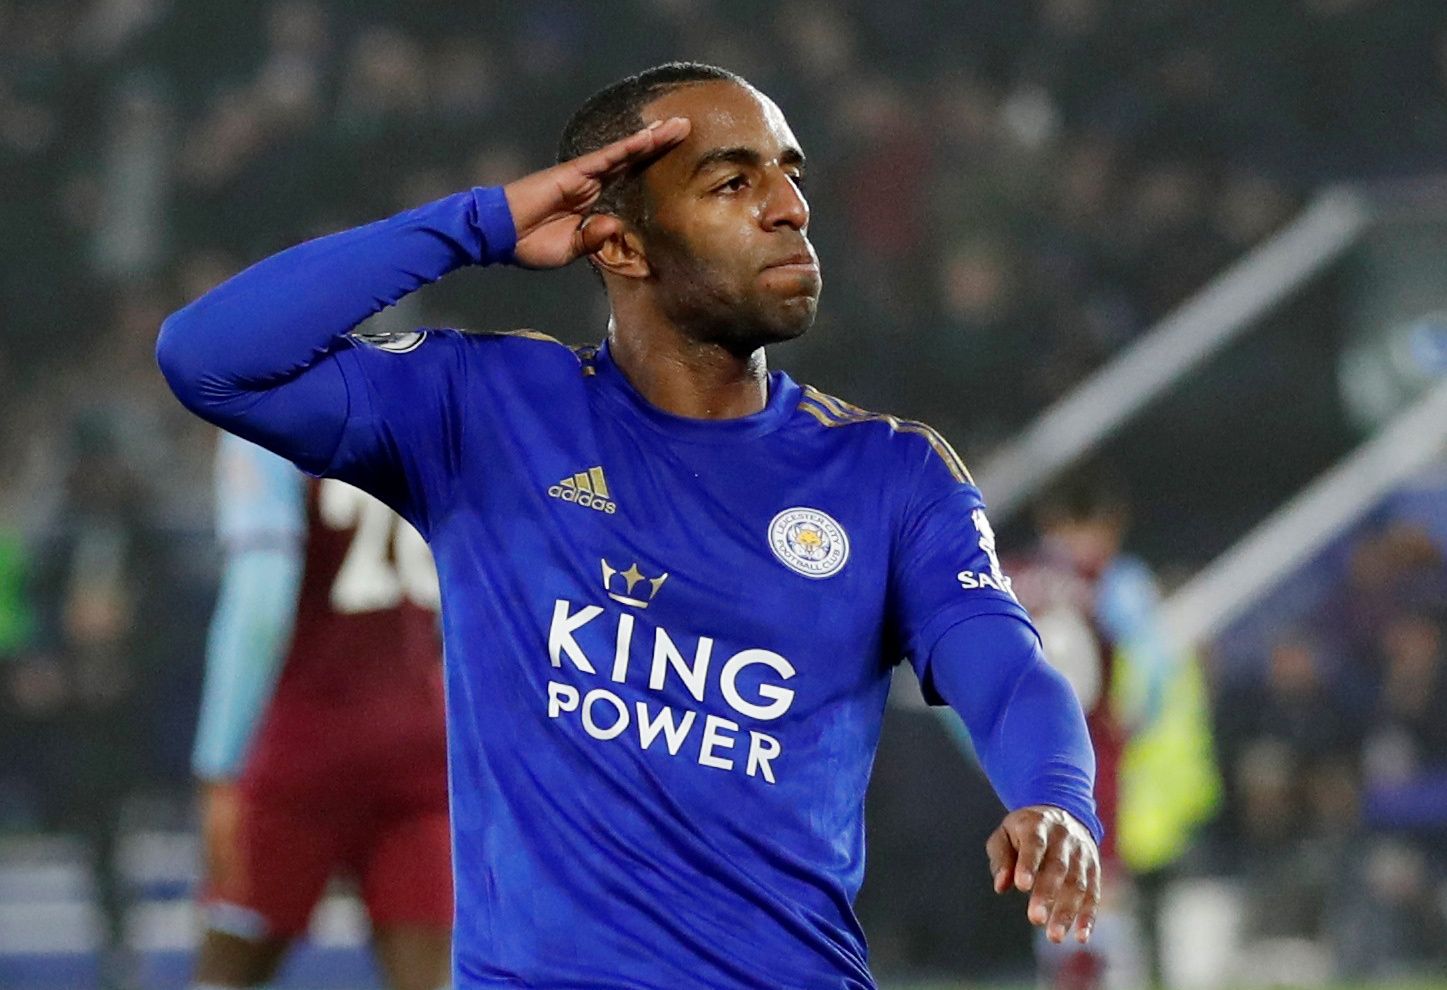 Soccer Football - Premier League - Leicester City v West Ham United - King Power Stadium, Leicester, Britain - January 22, 2020  Leicester City's Ricardo Pereira celebrates scoring their second goal   Action Images via Reuters/Andrew Boyers  EDITORIAL USE ONLY. No use with unauthorized audio, video, data, fixture lists, club/league logos or 